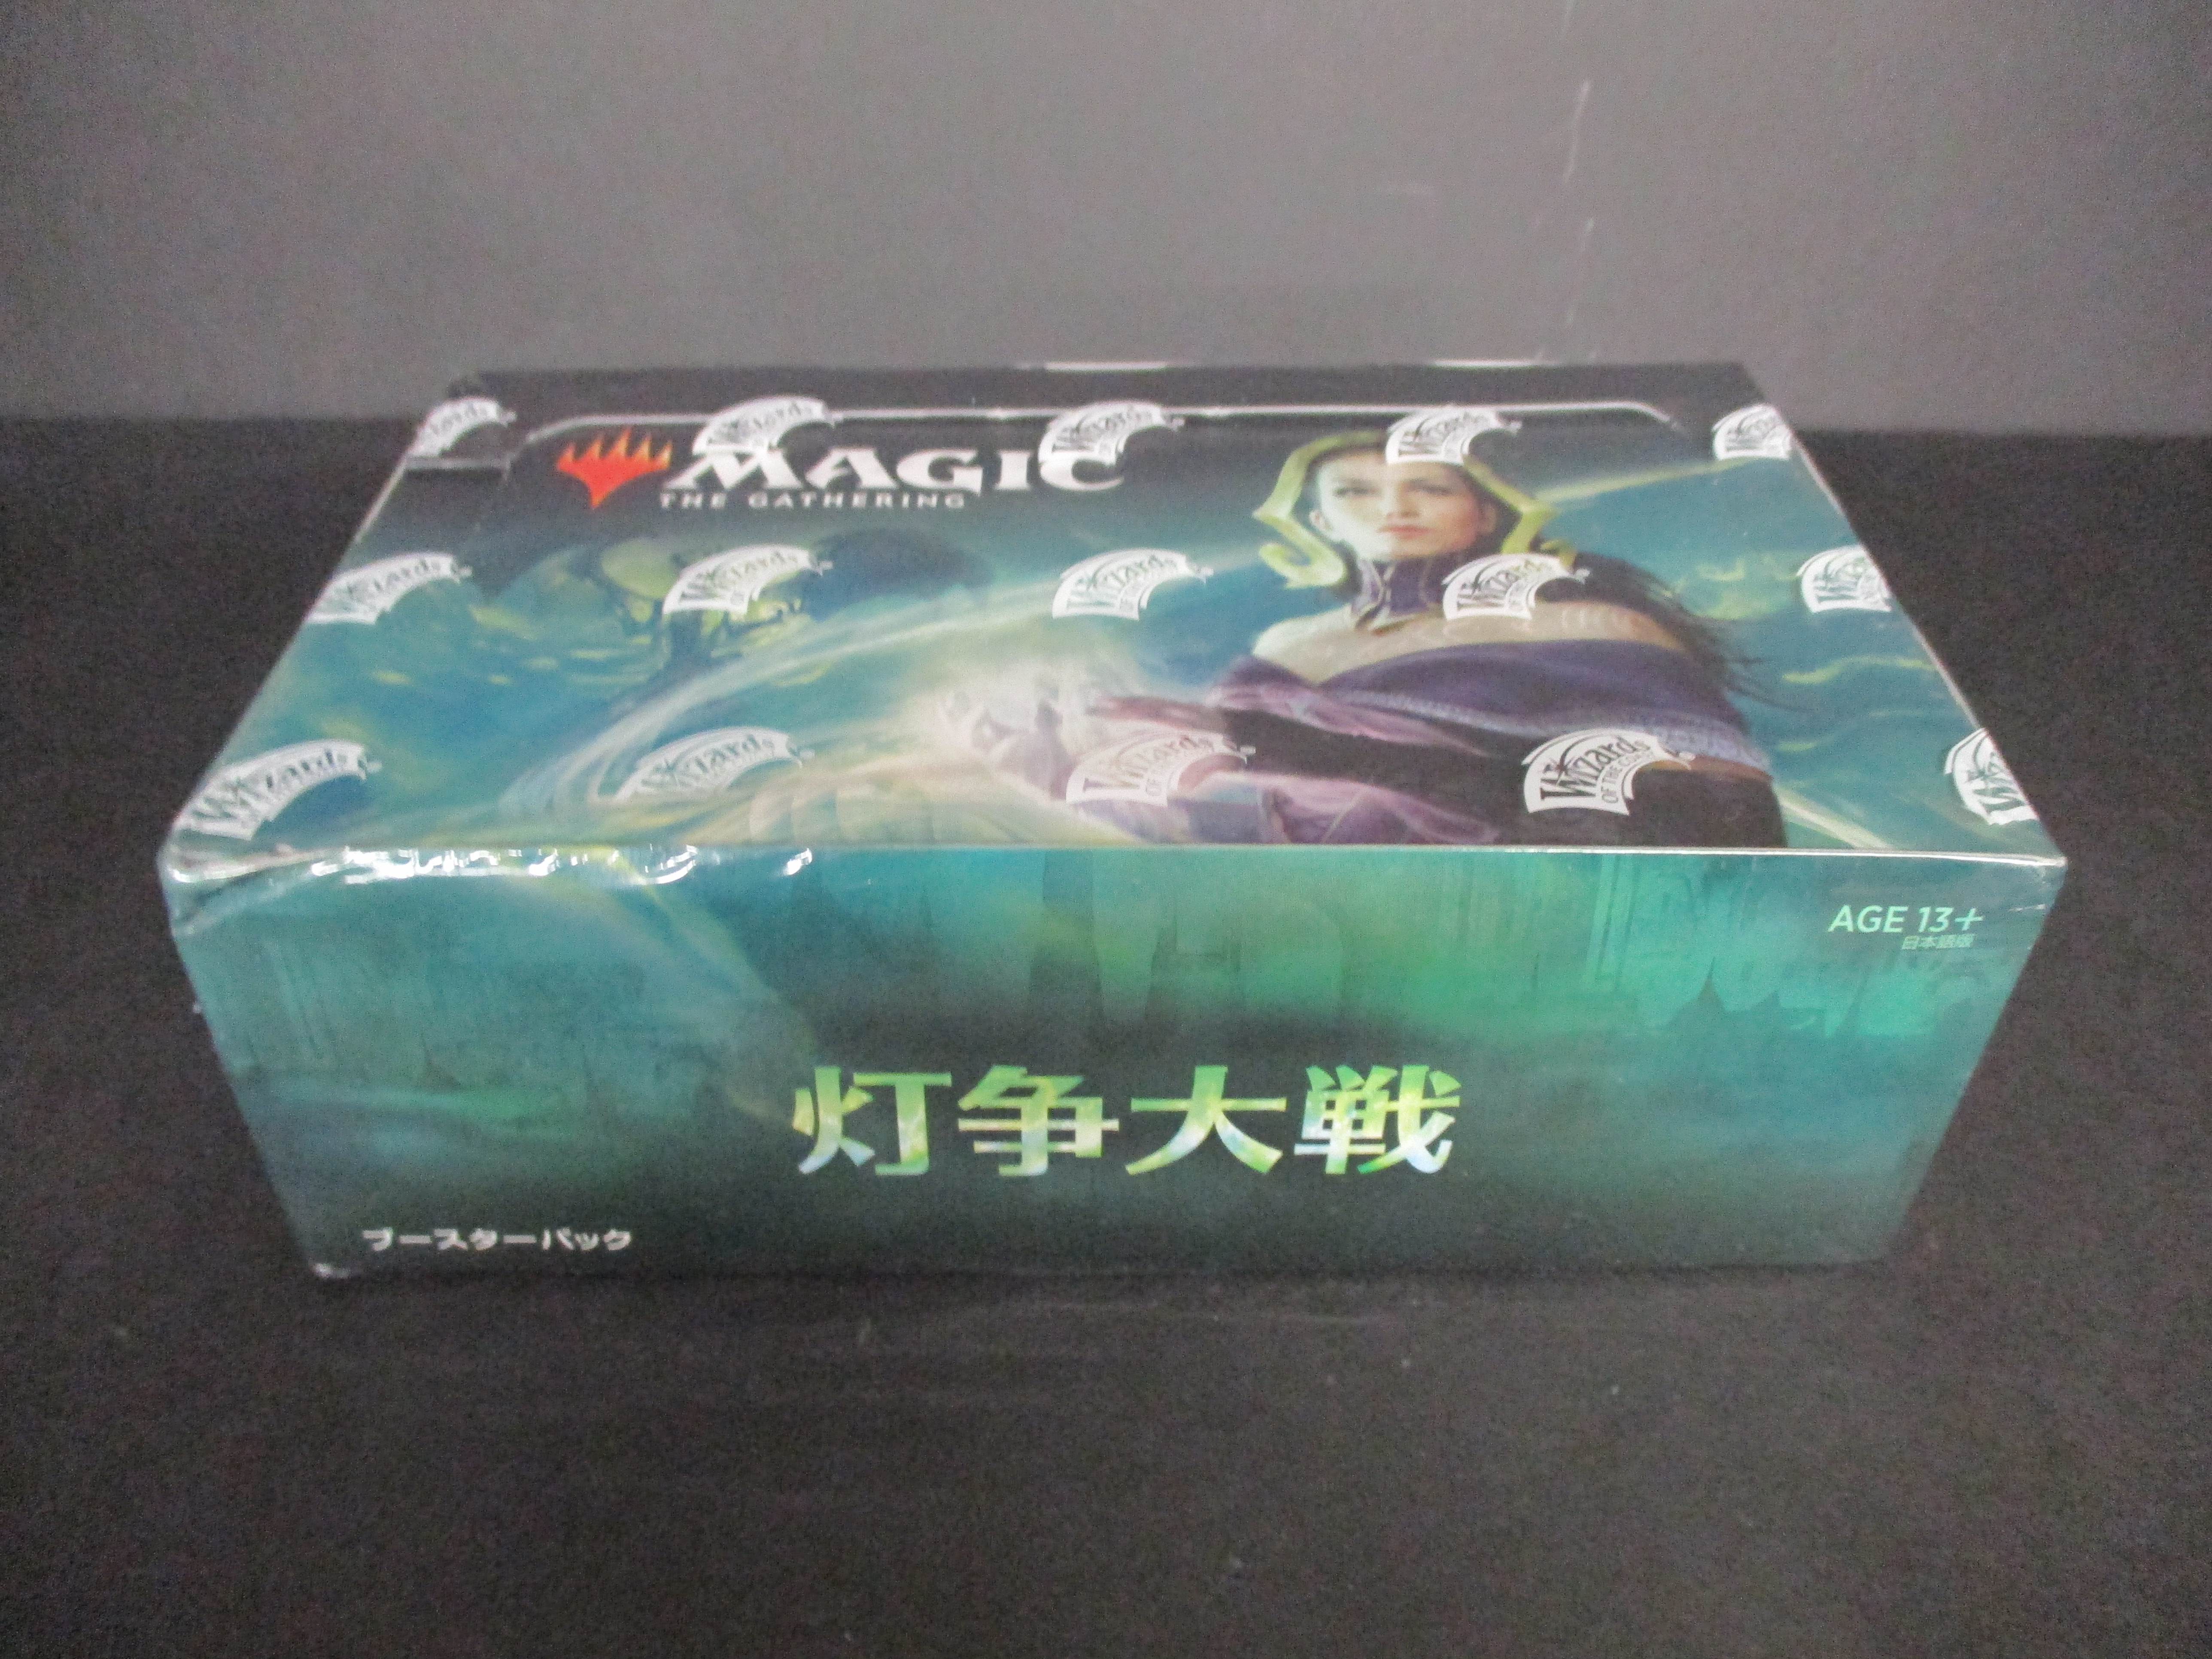 1x Magic The Gathering MTG Judgment Factory Booster Pack for sale online